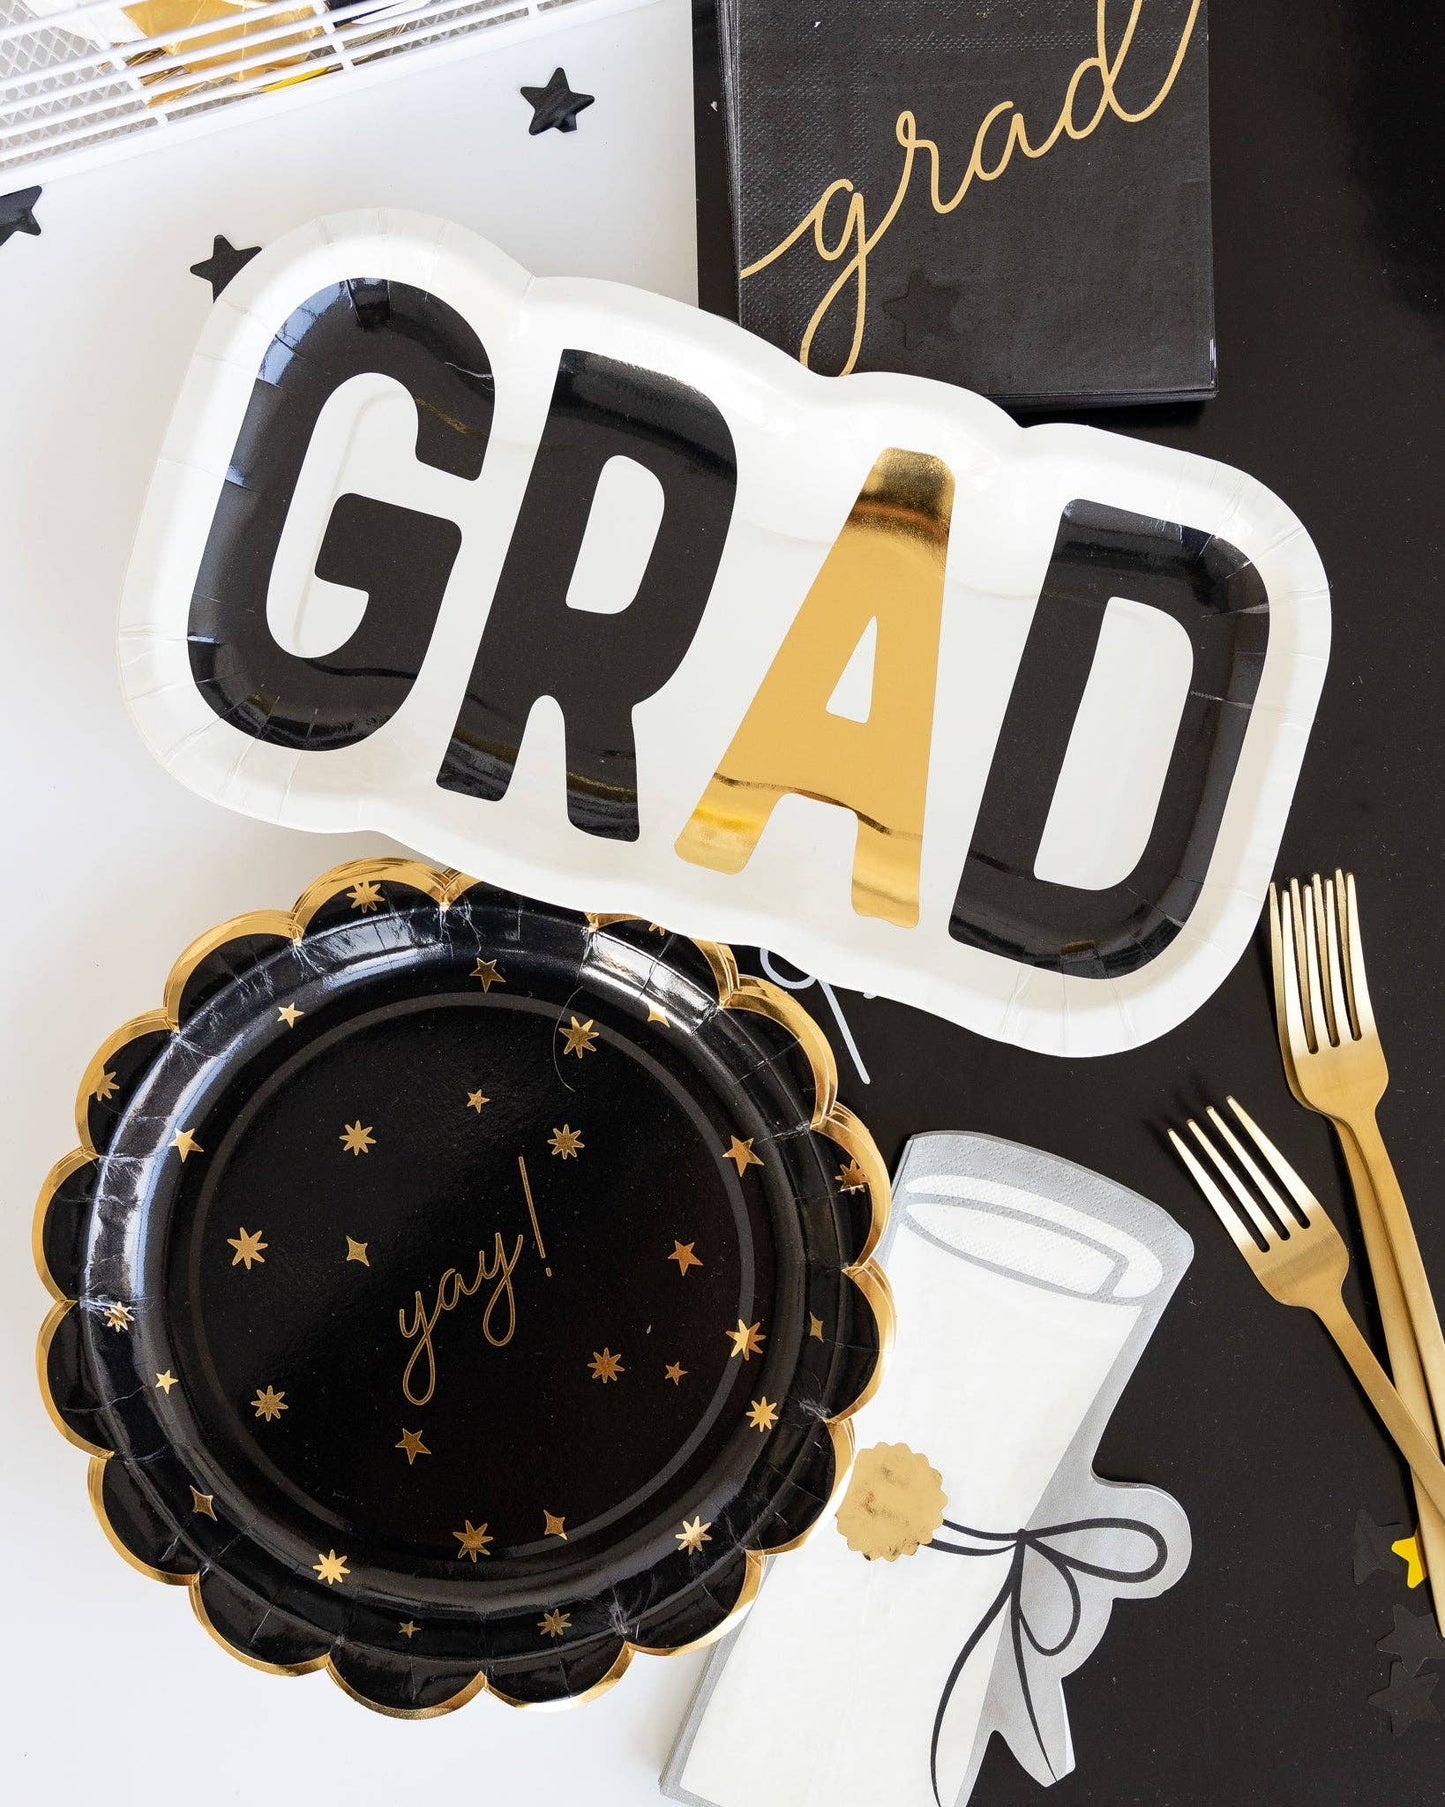 Starry "Yay" Paper Plate